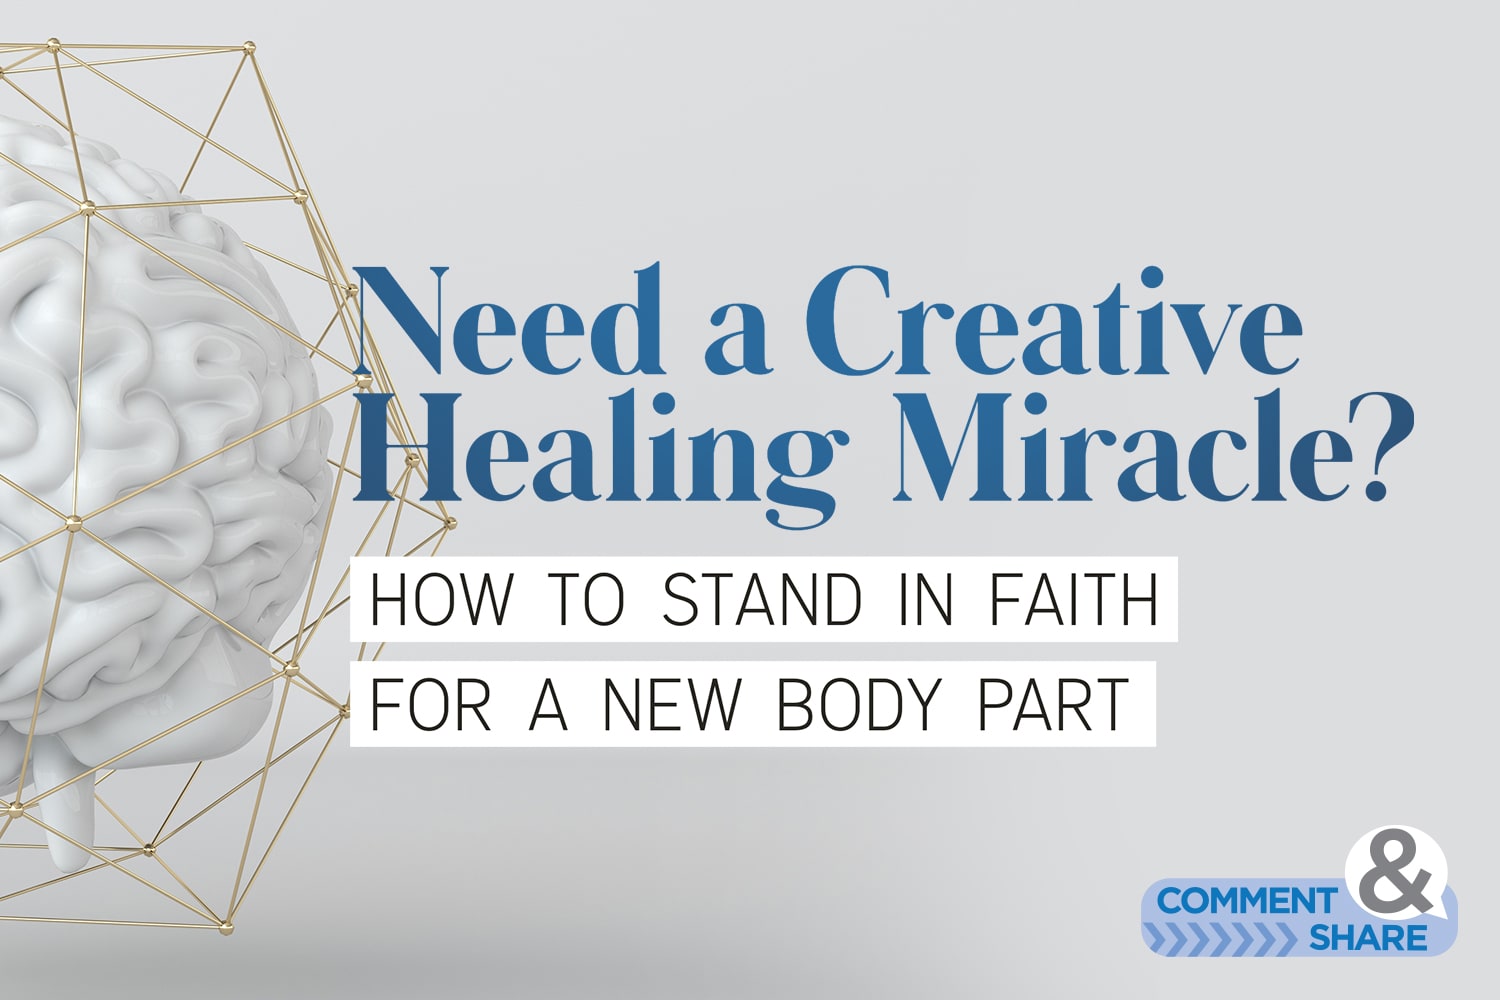 How to Stand in Faith for a New Body Part